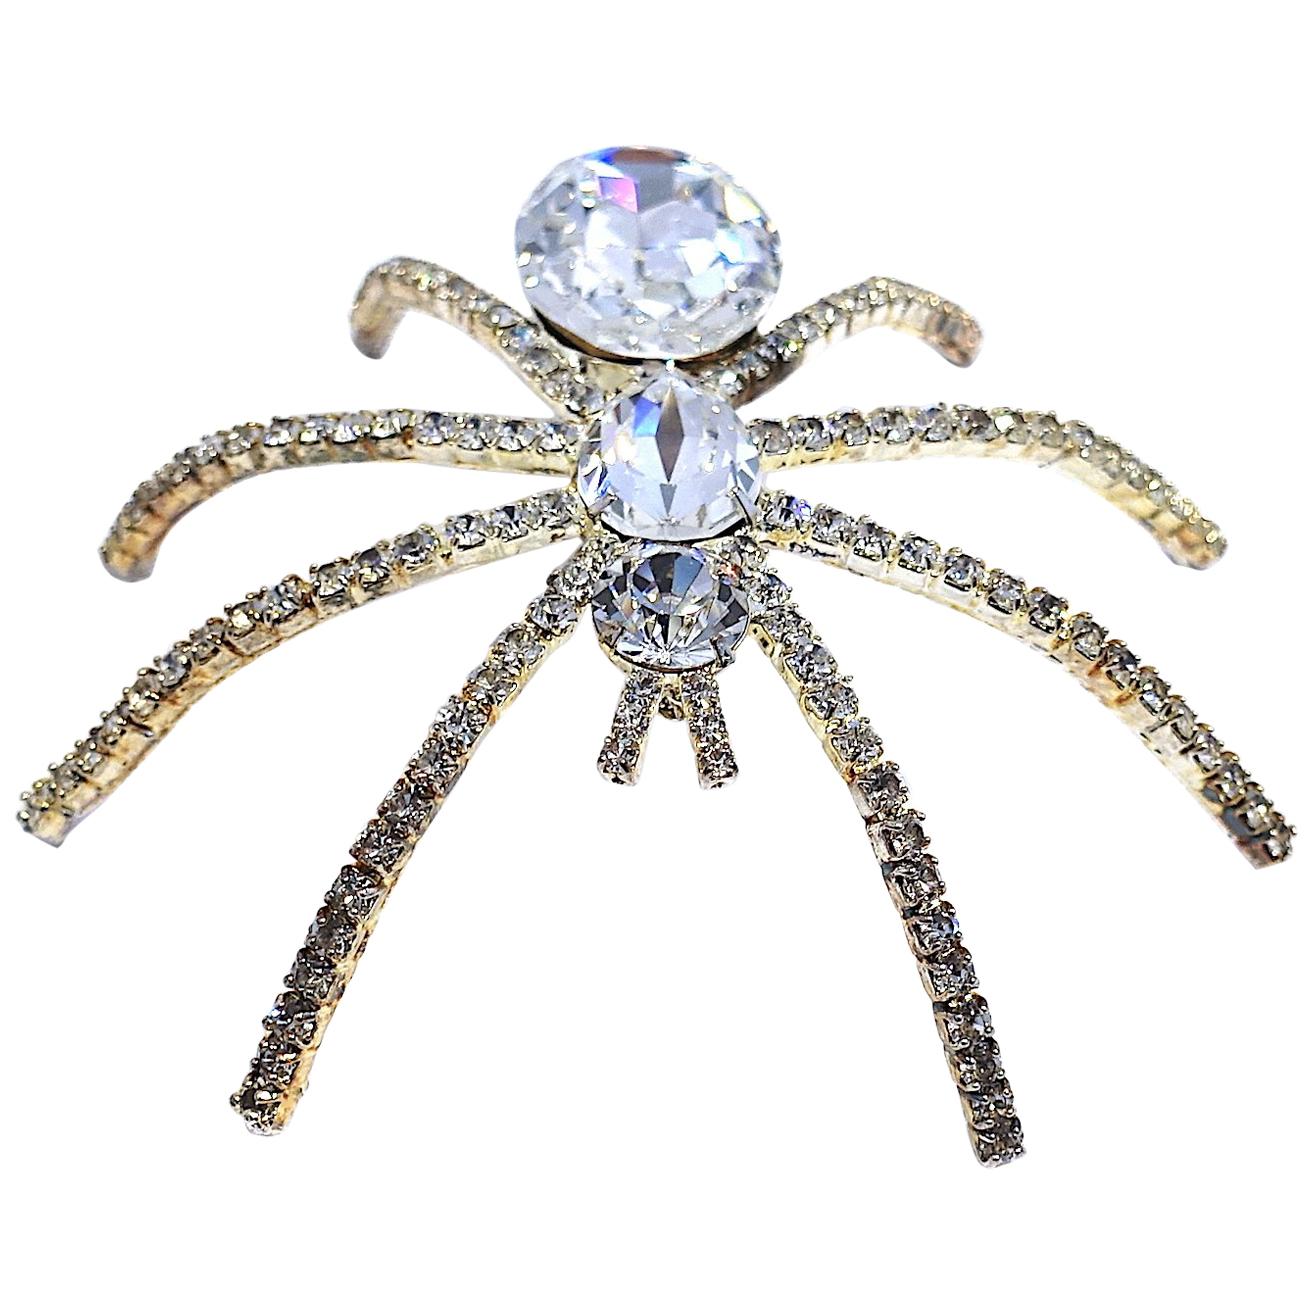 Large 4”by 3” Clear Crystals Spider Brooch